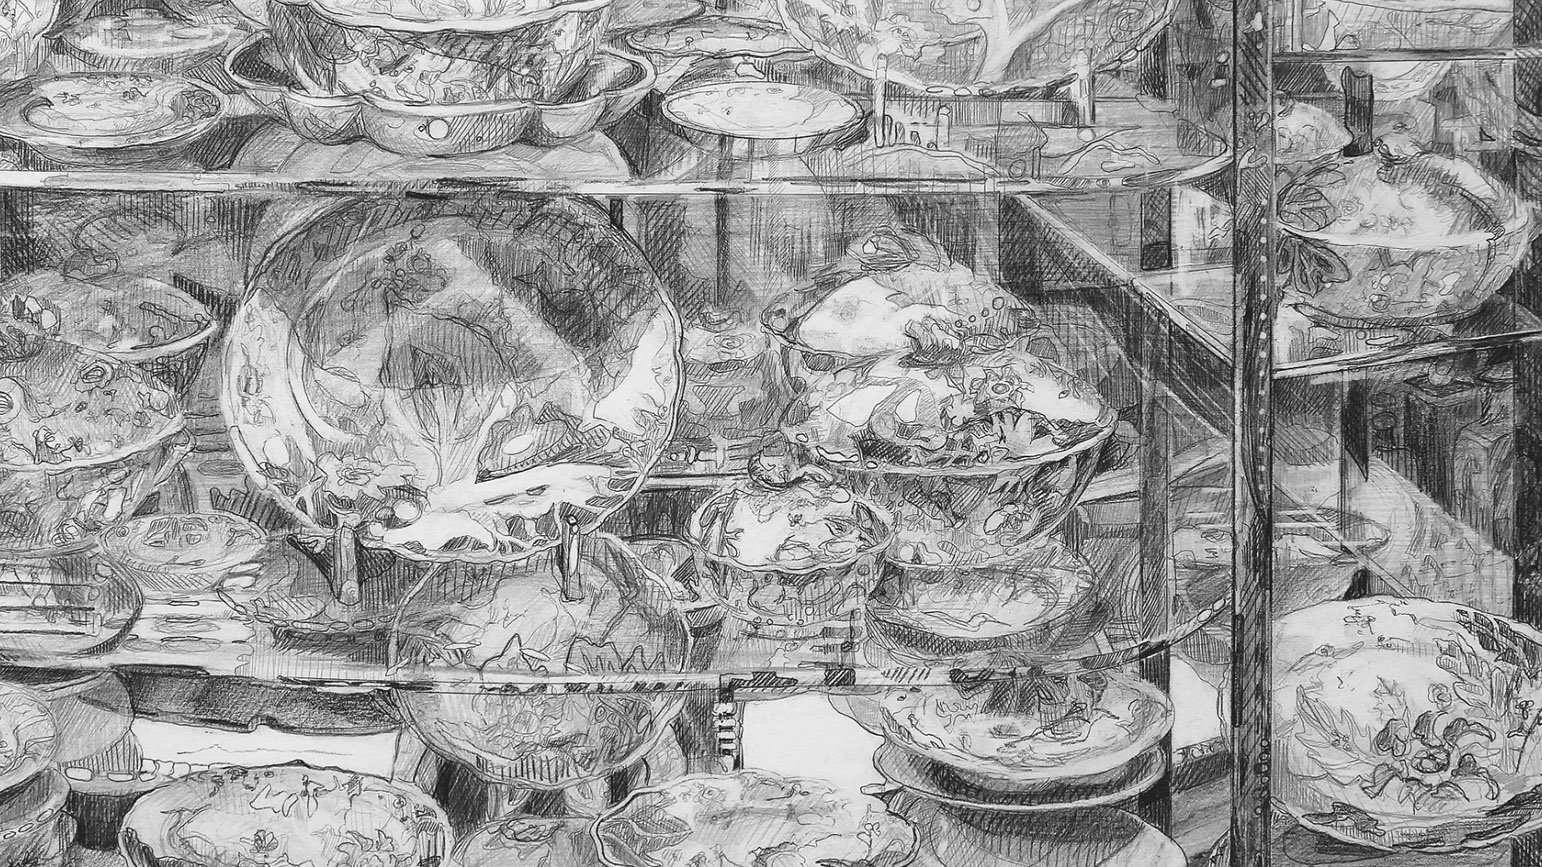 Drawing of many dishes on a glass display